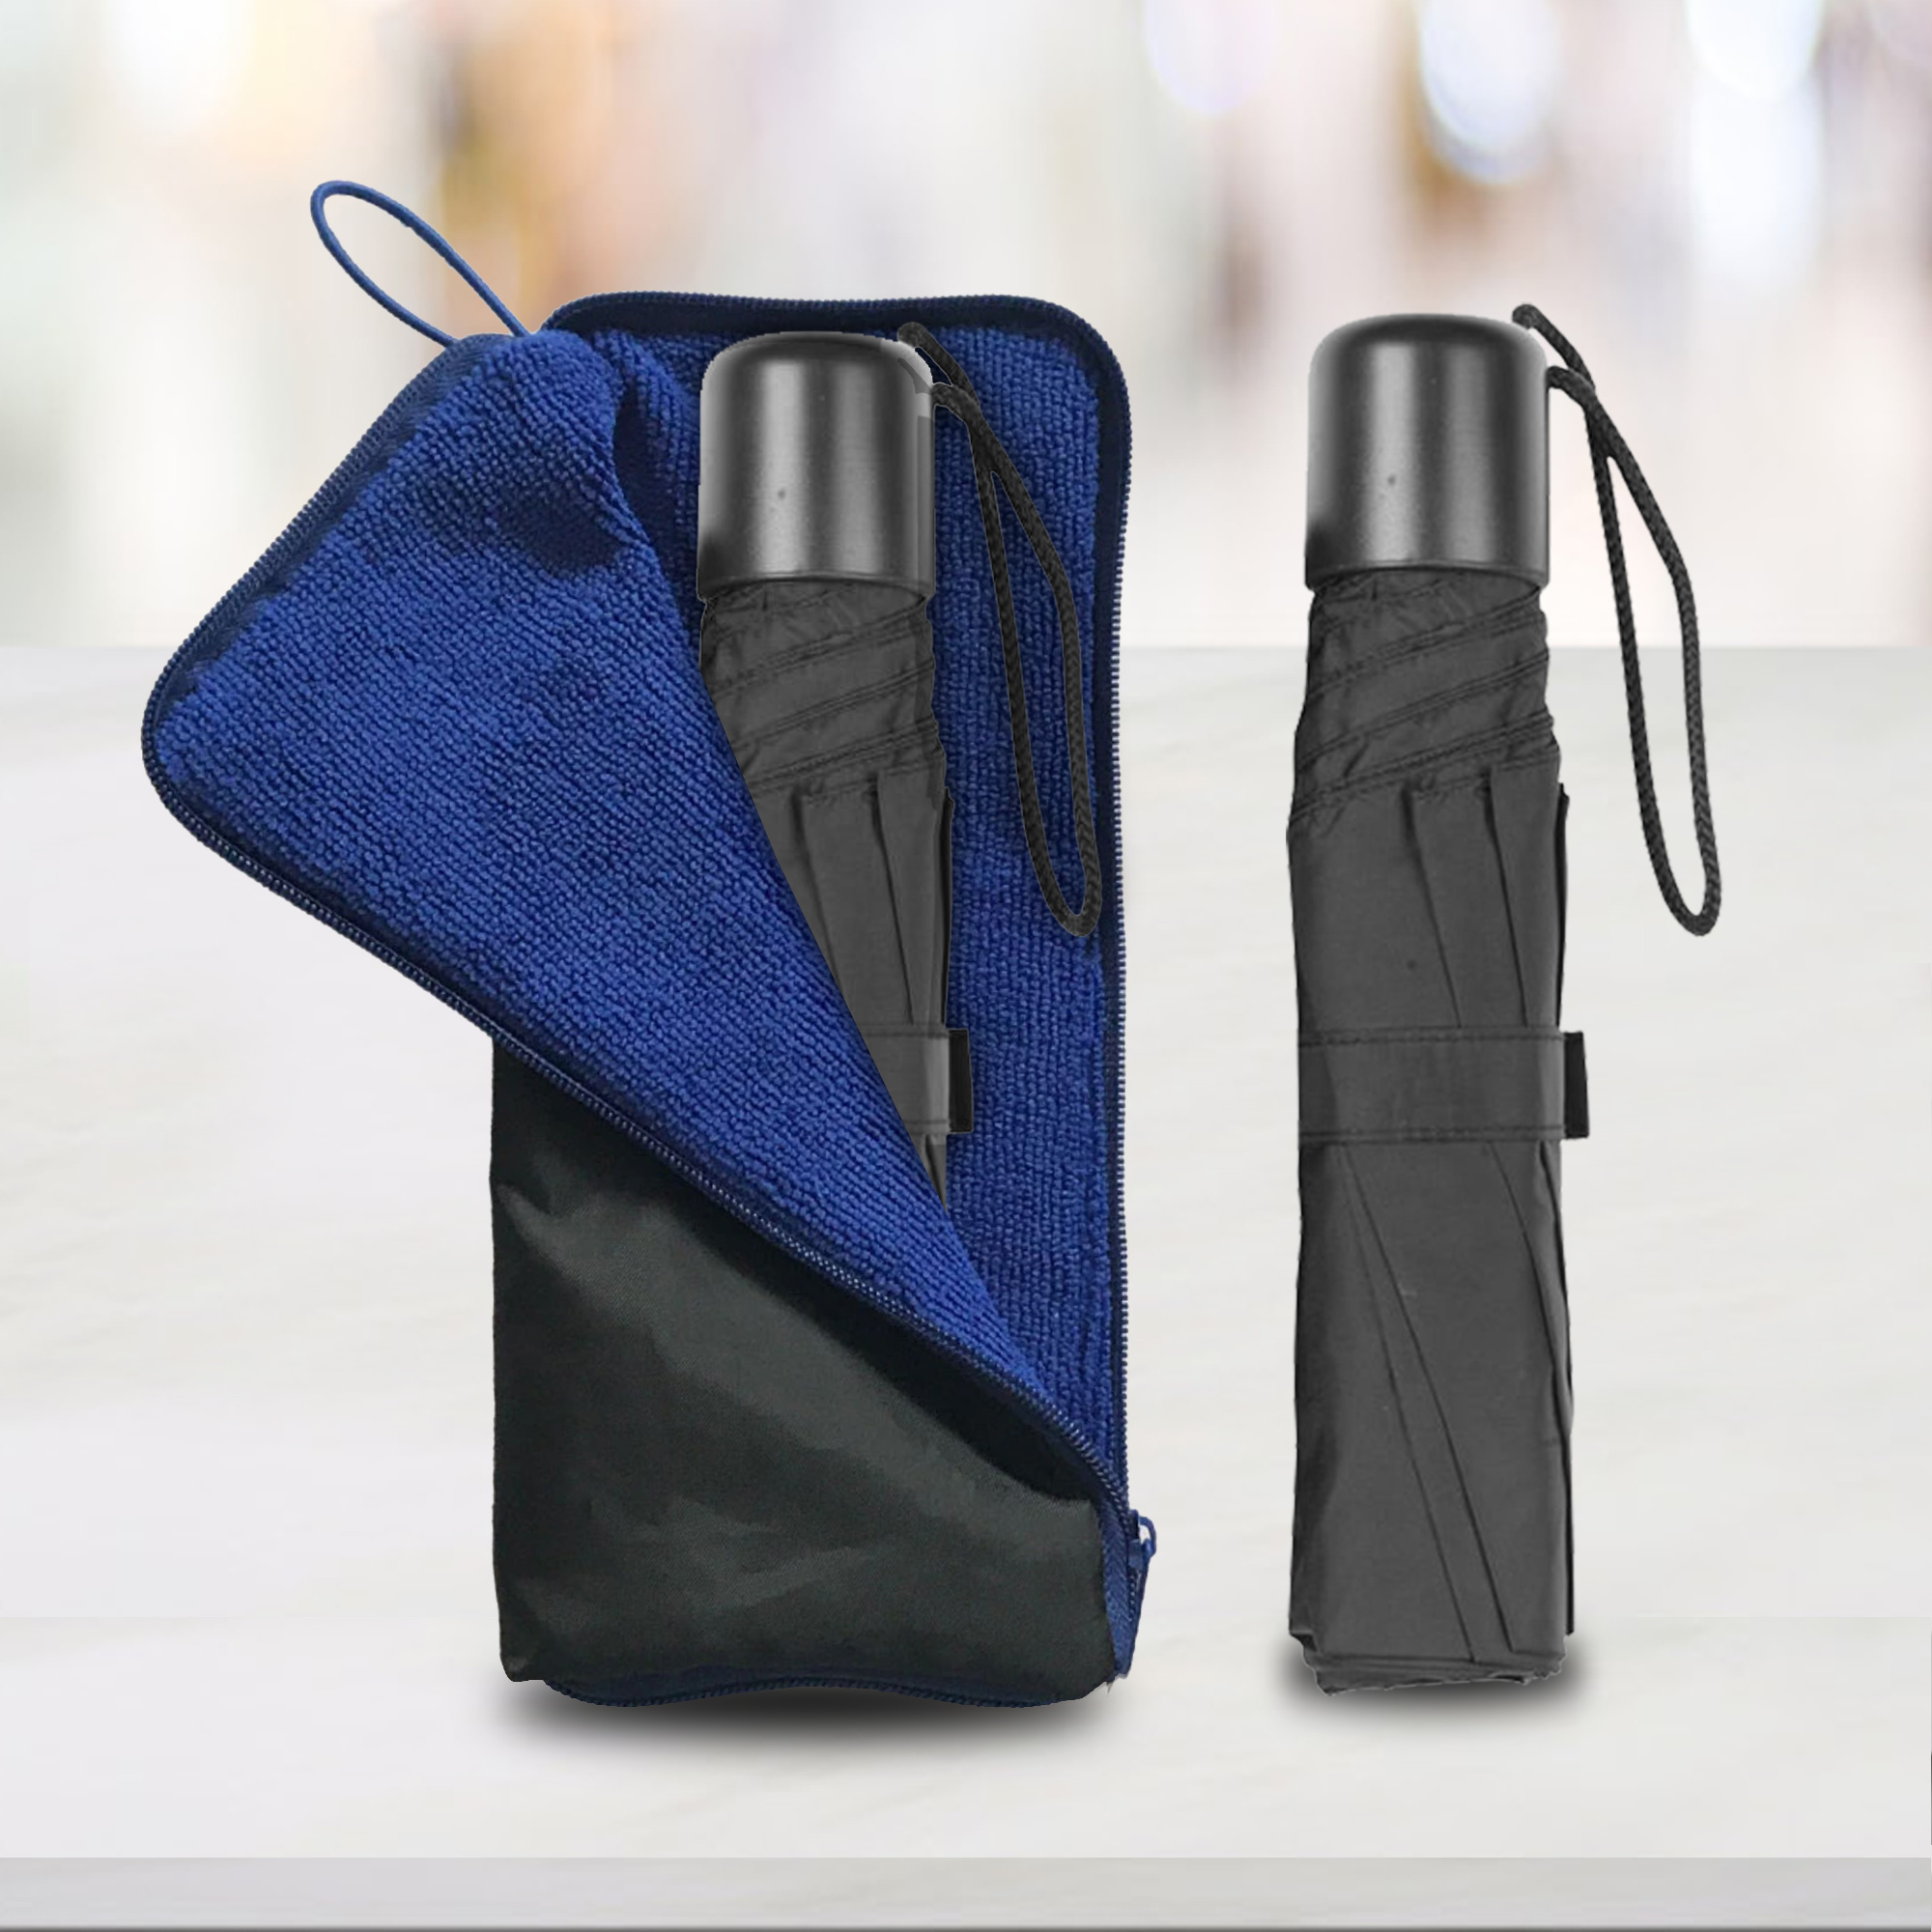 Foldable Umbrella with Water Absorbing Pouch